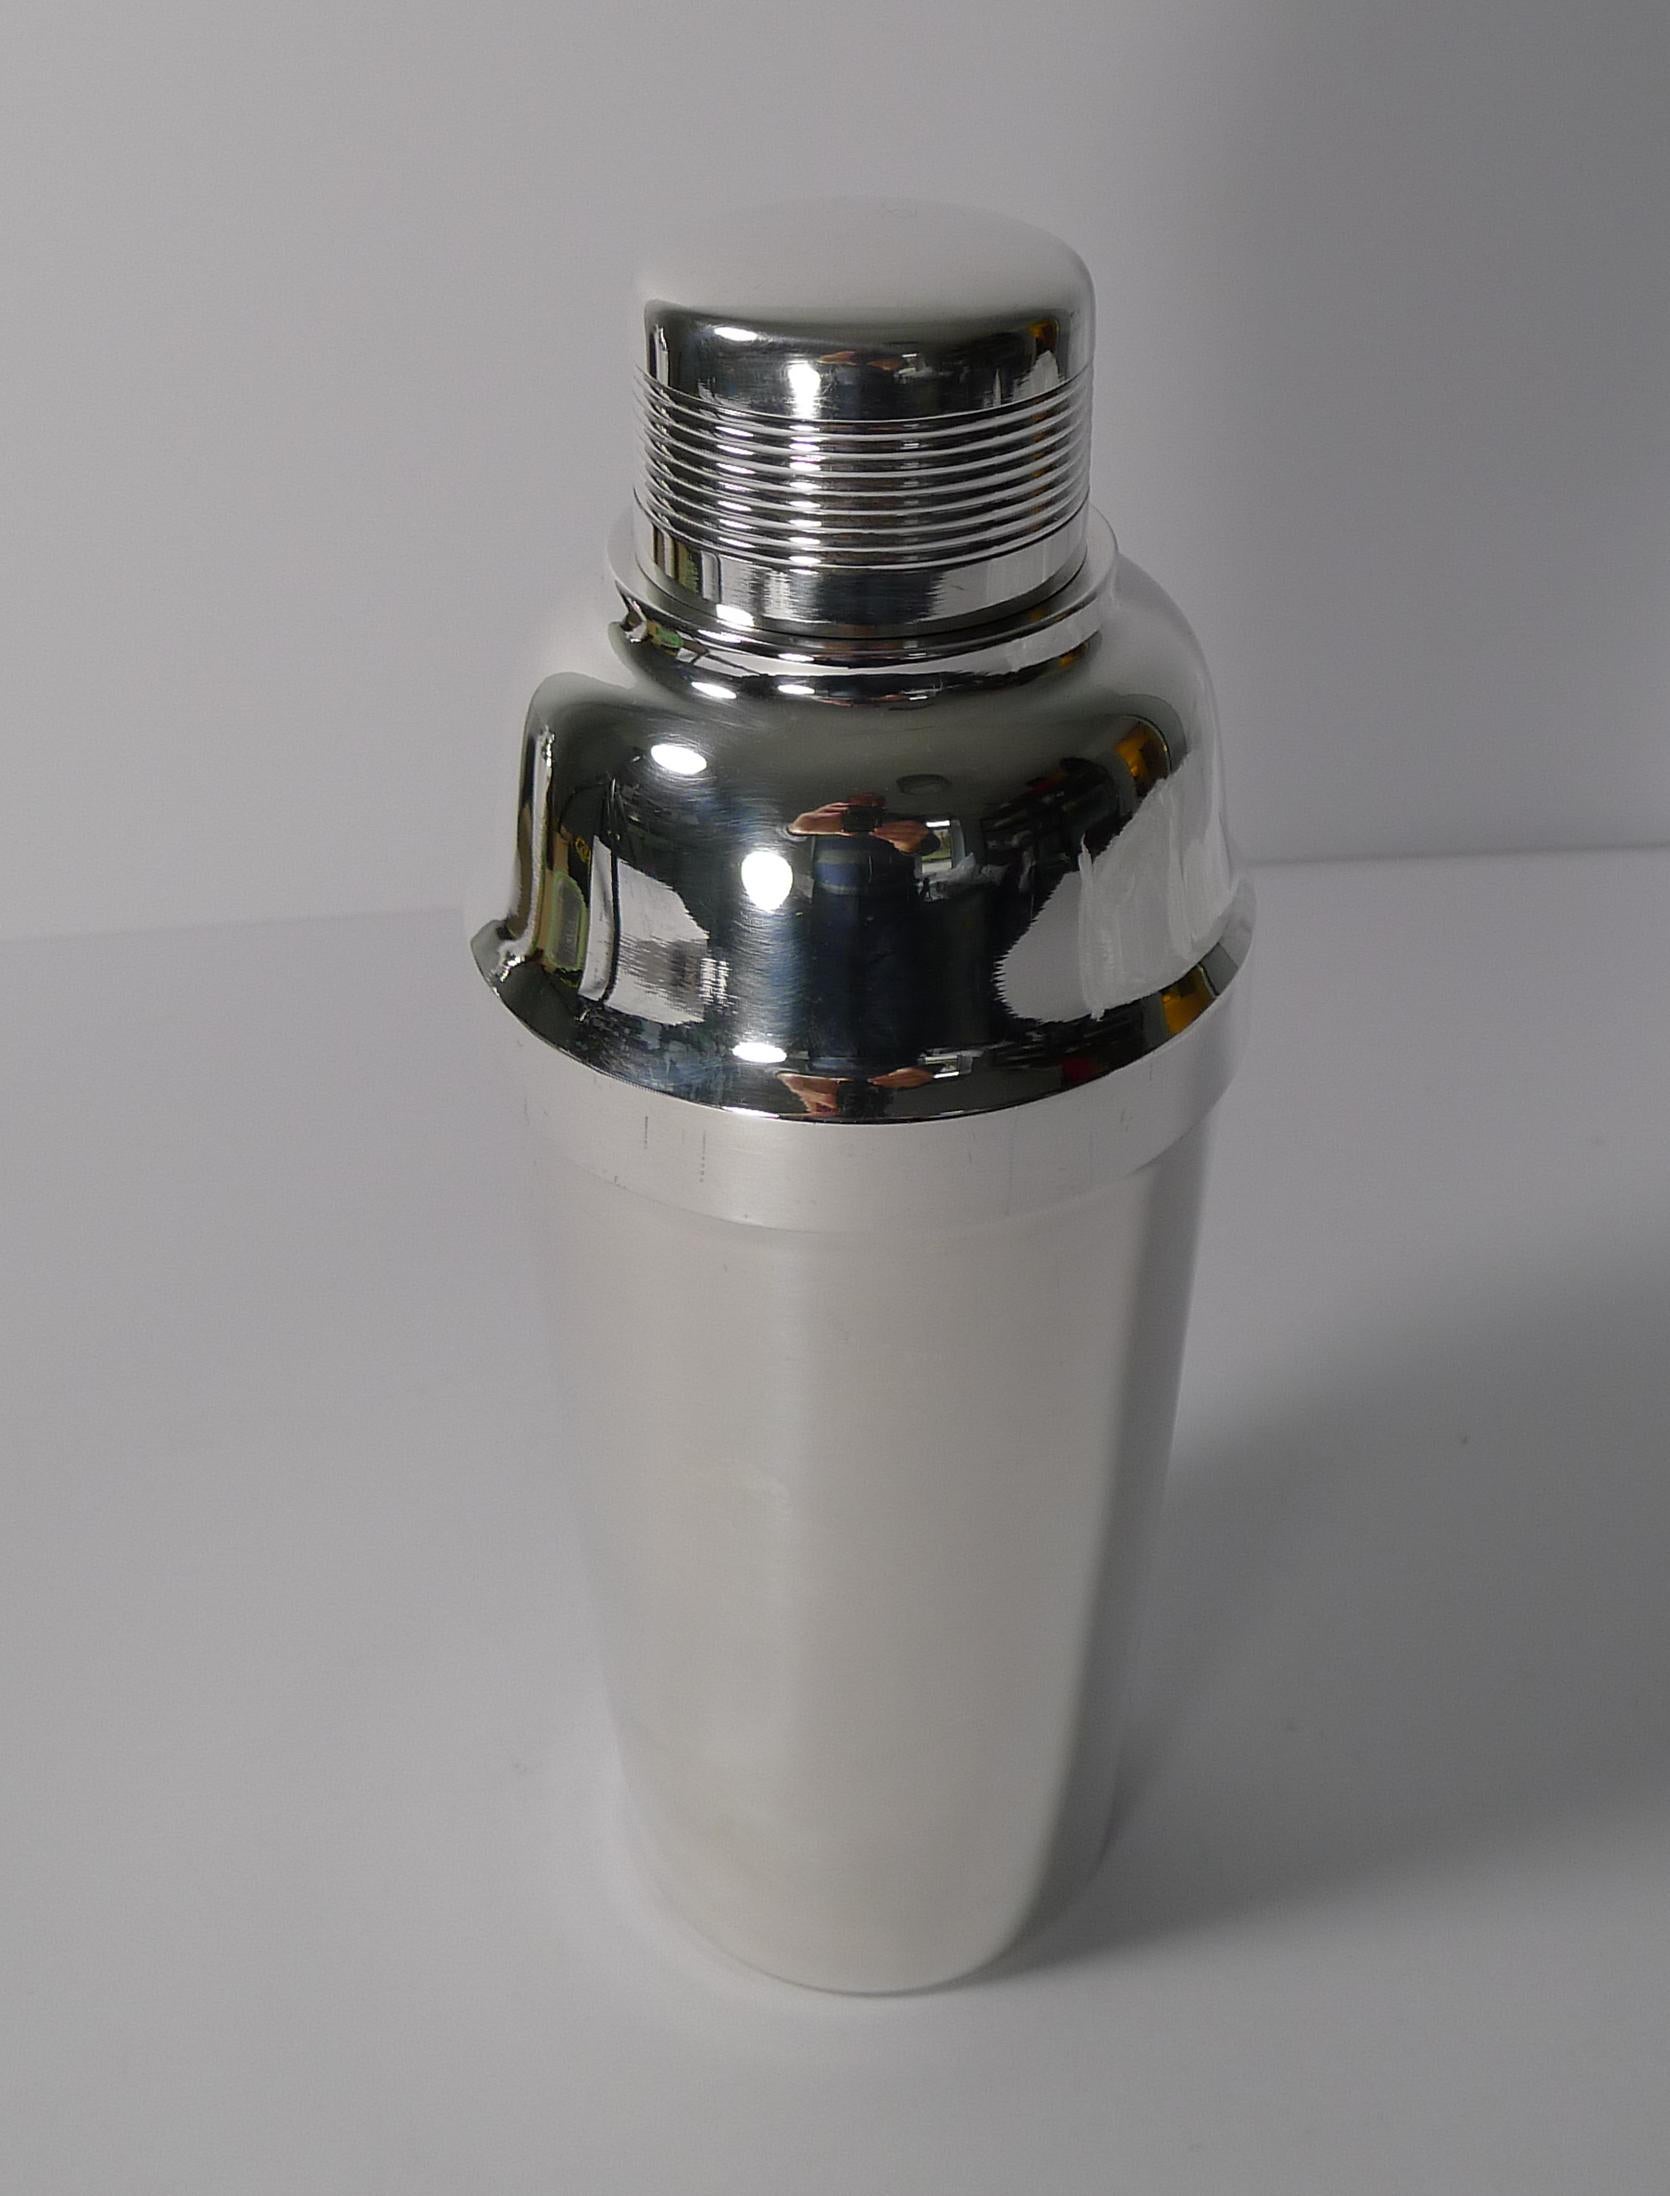 A top quality silver plated cocktail shaker by a top notch French silversmith, Orfèvrerie, Ercuis of Paris. Fully marked on the underside.

Art Deco in era dating to circa 1940. Just back from our silversmith's workshop having been professionally